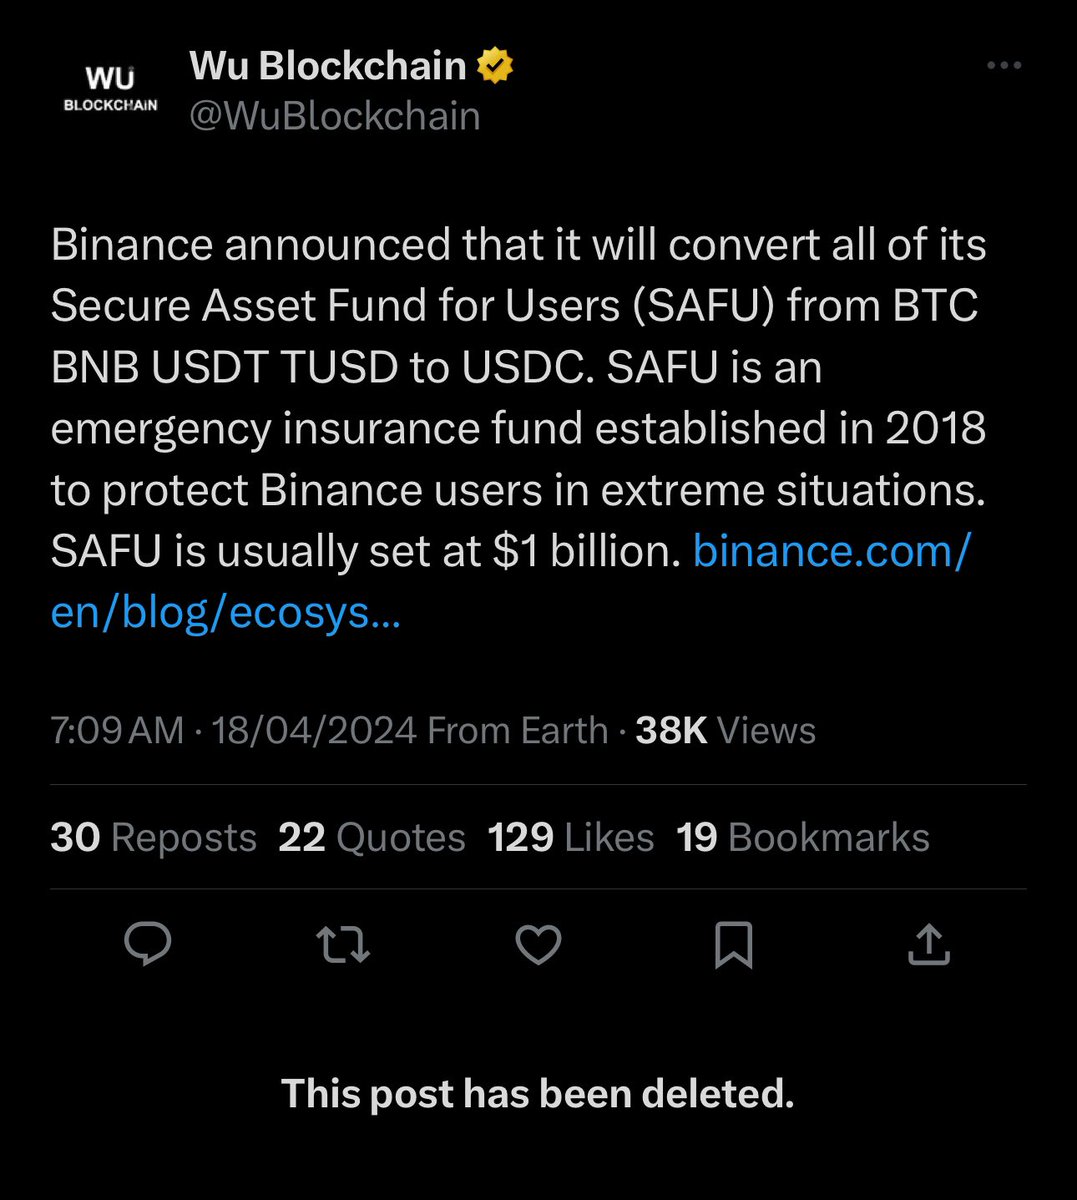 Binance converting all SAFU assets to USDC! 

Looks like we are getting a major USDT fud soon